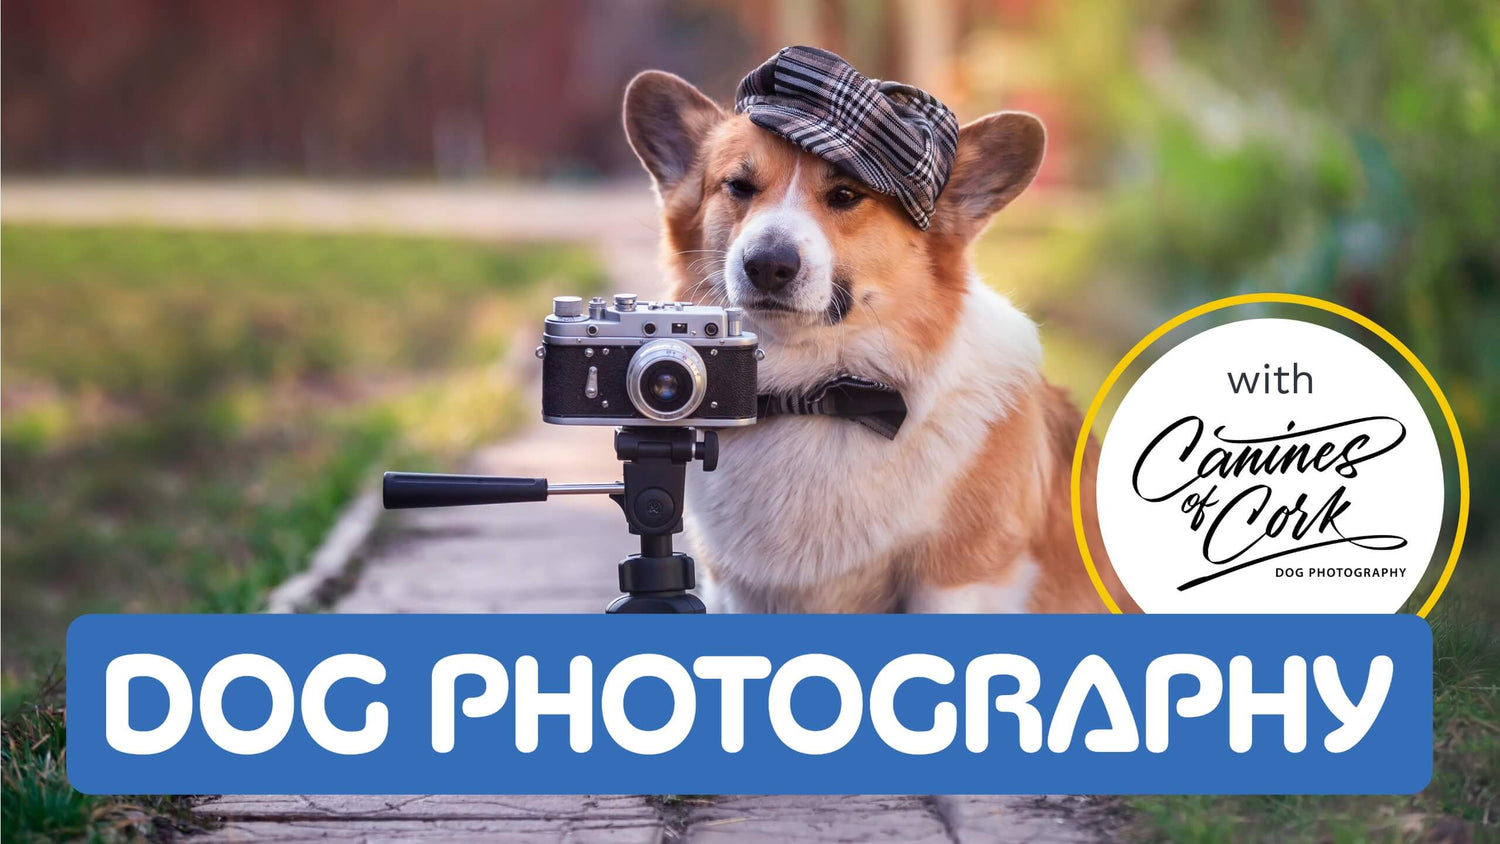 A dog with a hat sitting behind a old camera on a tripod and a box with text “Dog Photography”